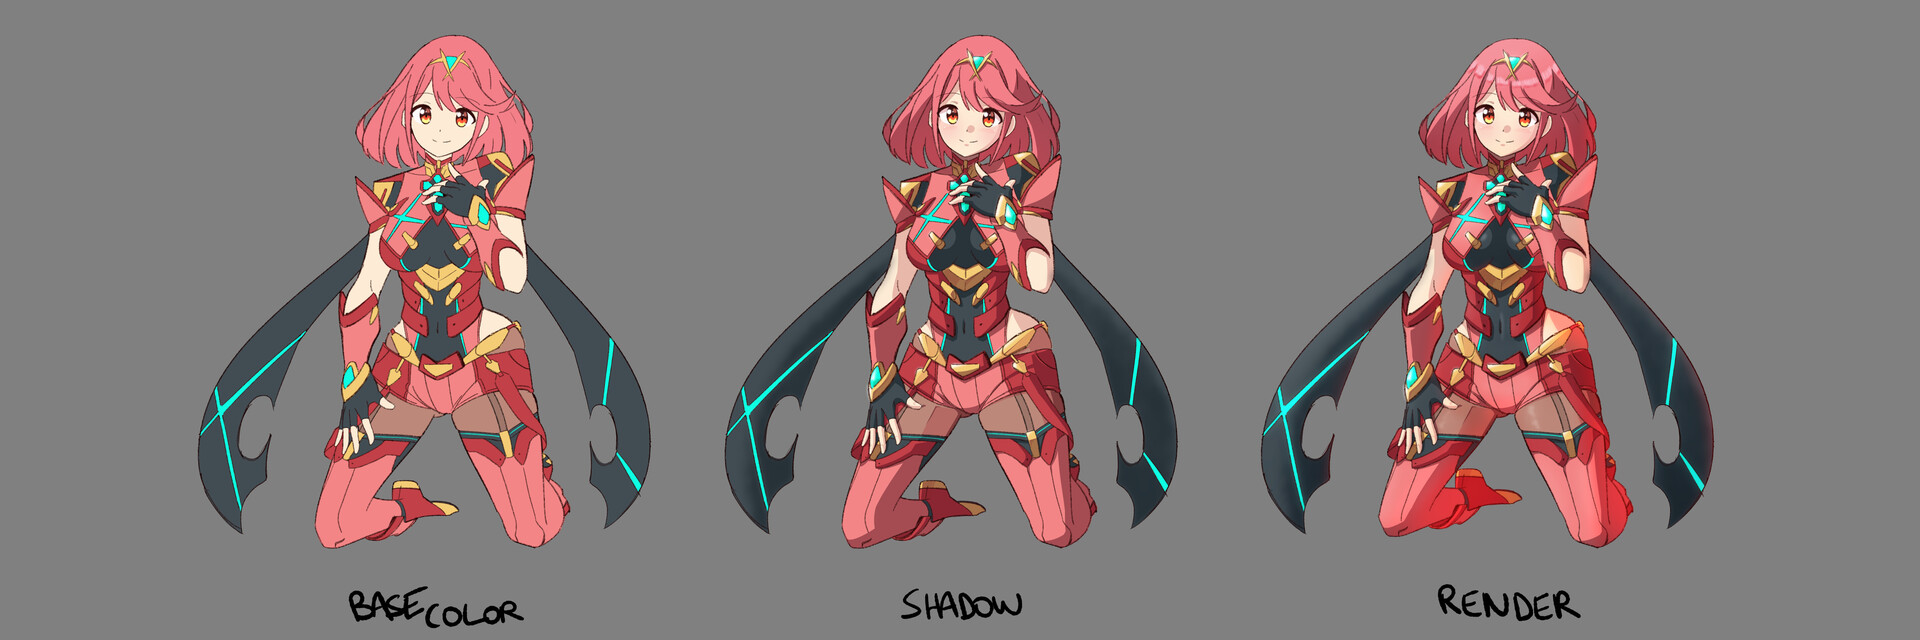 Xenoblade Chronicles 3 Concept Art & Characters - Page 2